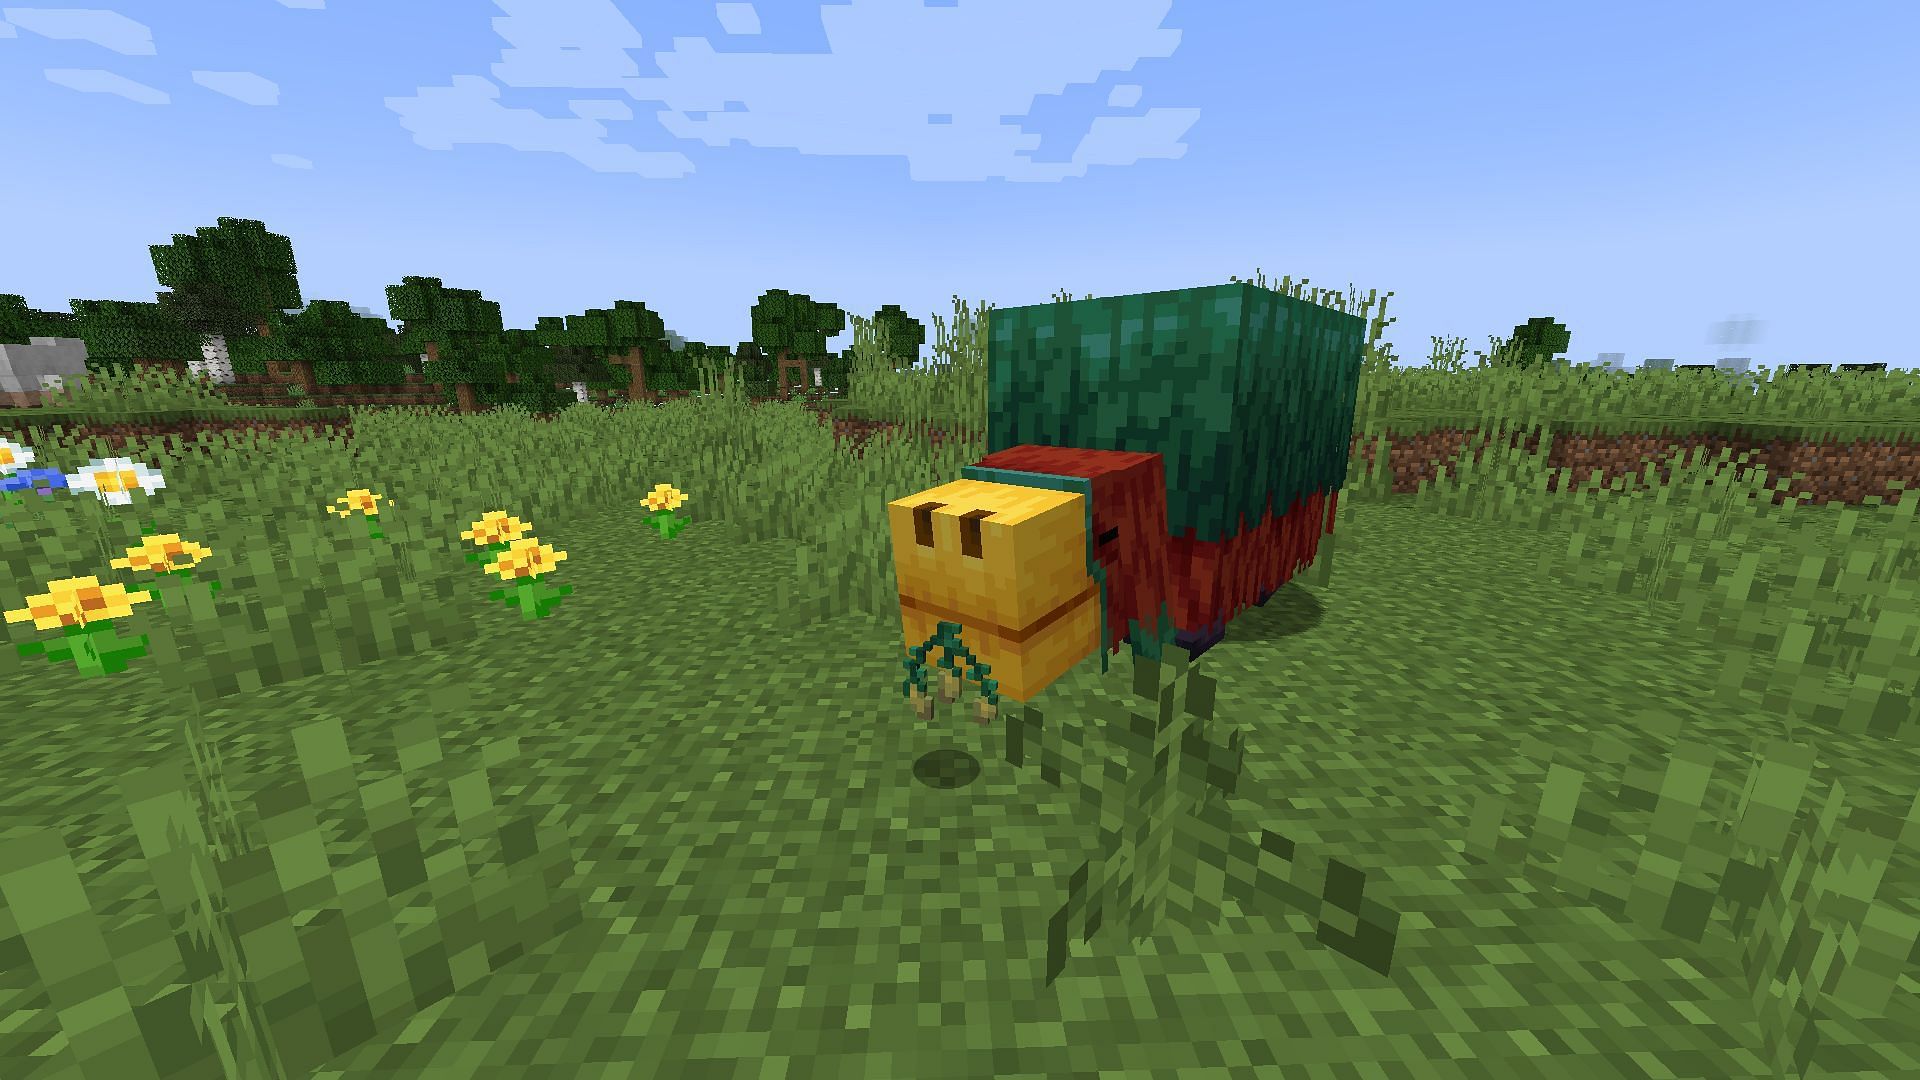 Sniffer will mainly breed with torchflower seeds in Minecraft 1.20 (Image via Mojang)